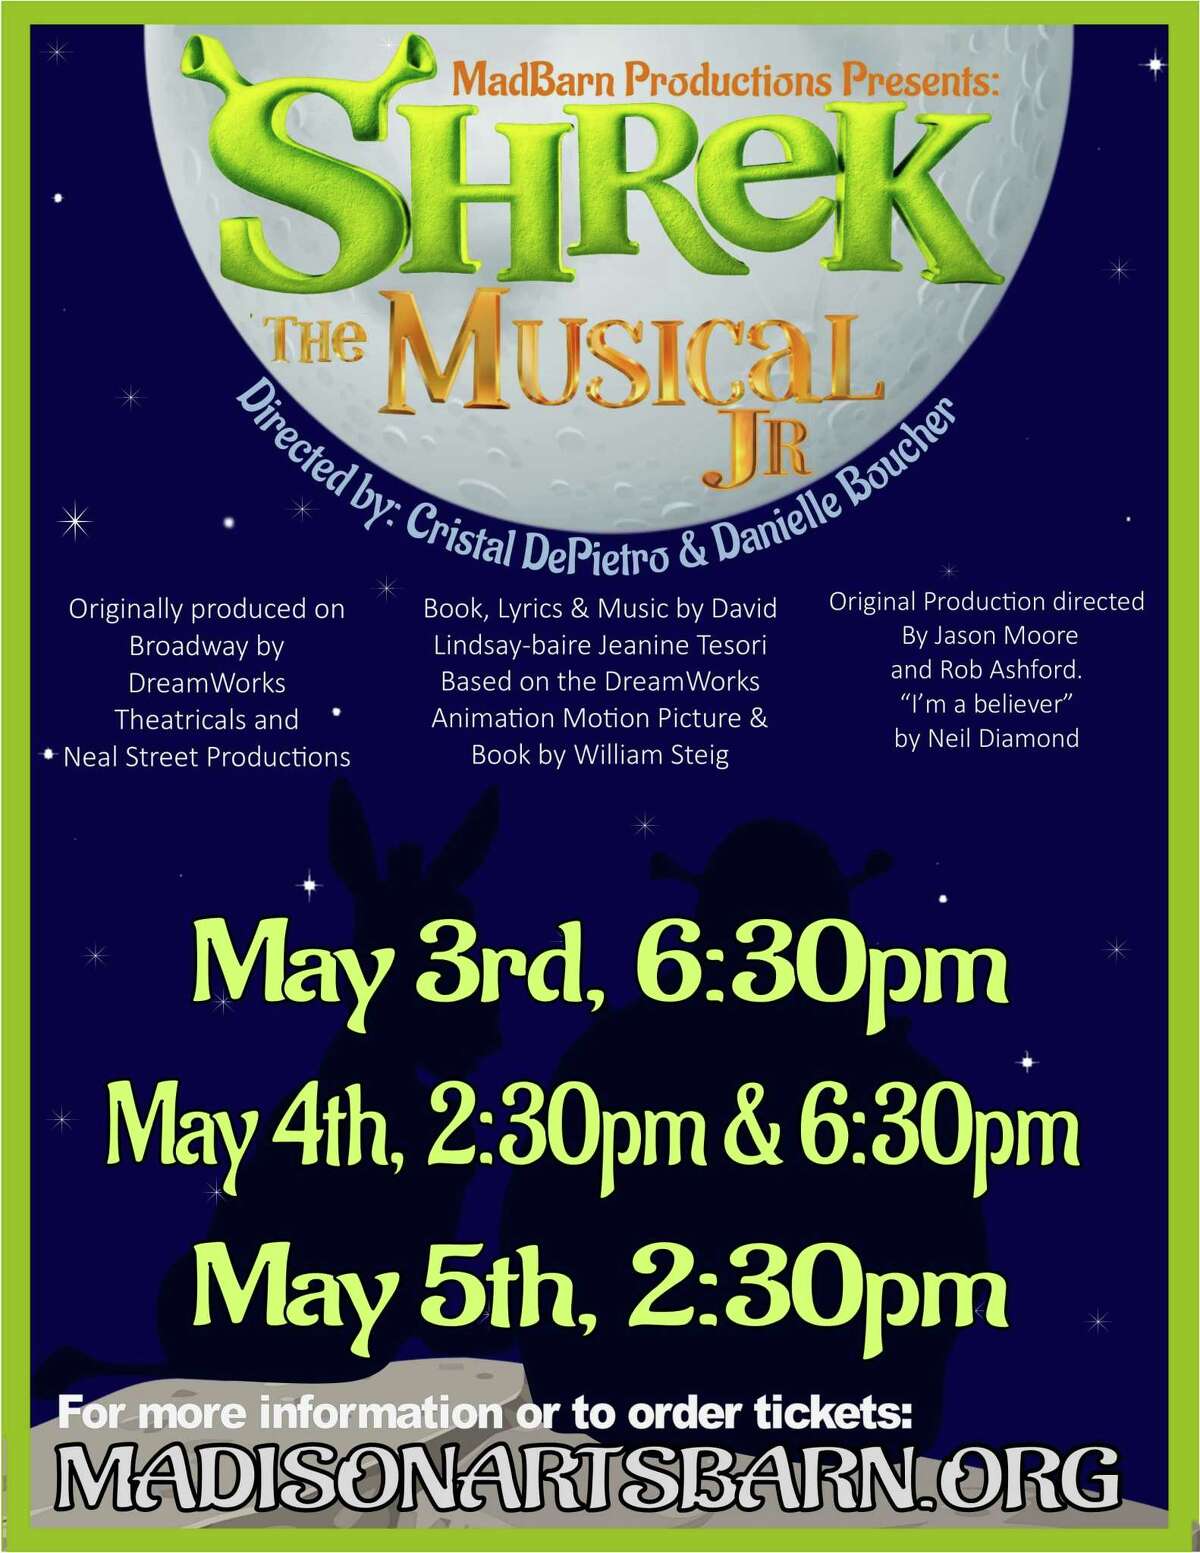 Madison Arts Barn will stage "Shrek the Musical Jr." May 3-5, 2019, featuring local young people in the cast.